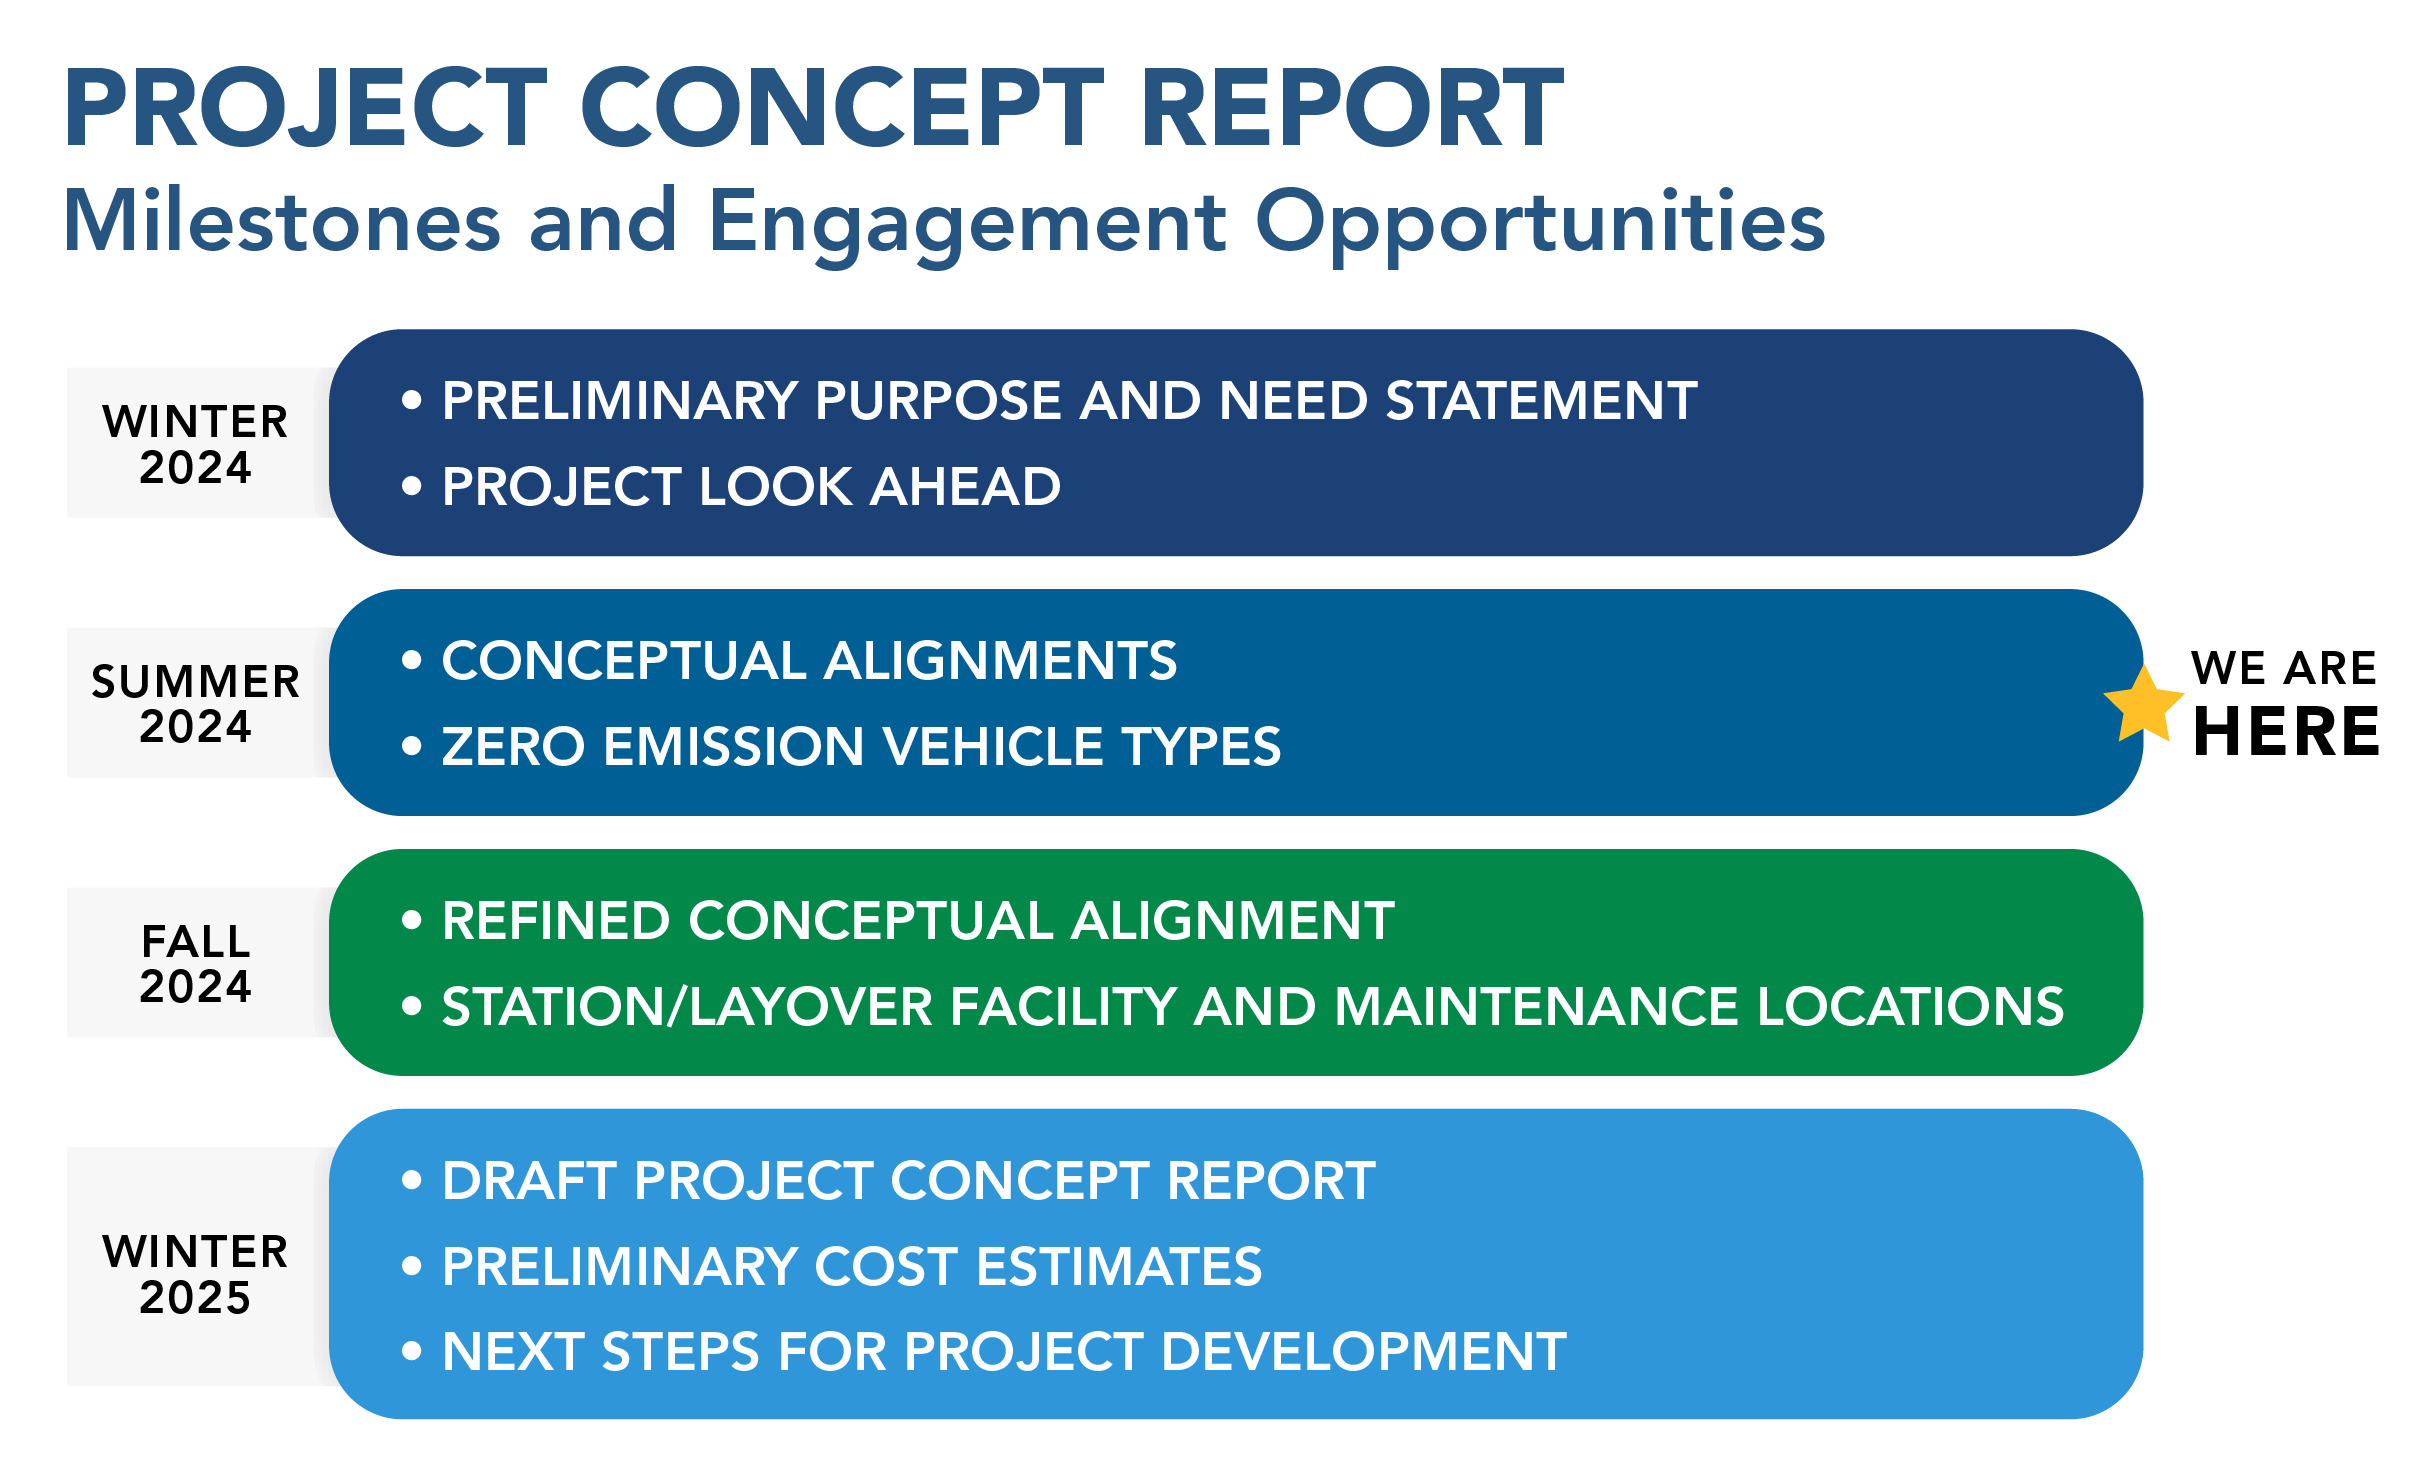 Image shows a timeline of milestones and engagement opportunities for the development of the Project Concept Report. Milestones include the Winter 2024 milestone with the Preliminary Purpose and Need and project look ahead. The current Summer 2024 milestones include conceptual alignments and zero emission vehicle types. In Fall 2024, milestones include refined conceptual alignment and facility and maintenance locations. And in Winter 2025, milestones include the draft project concept report and next steps.